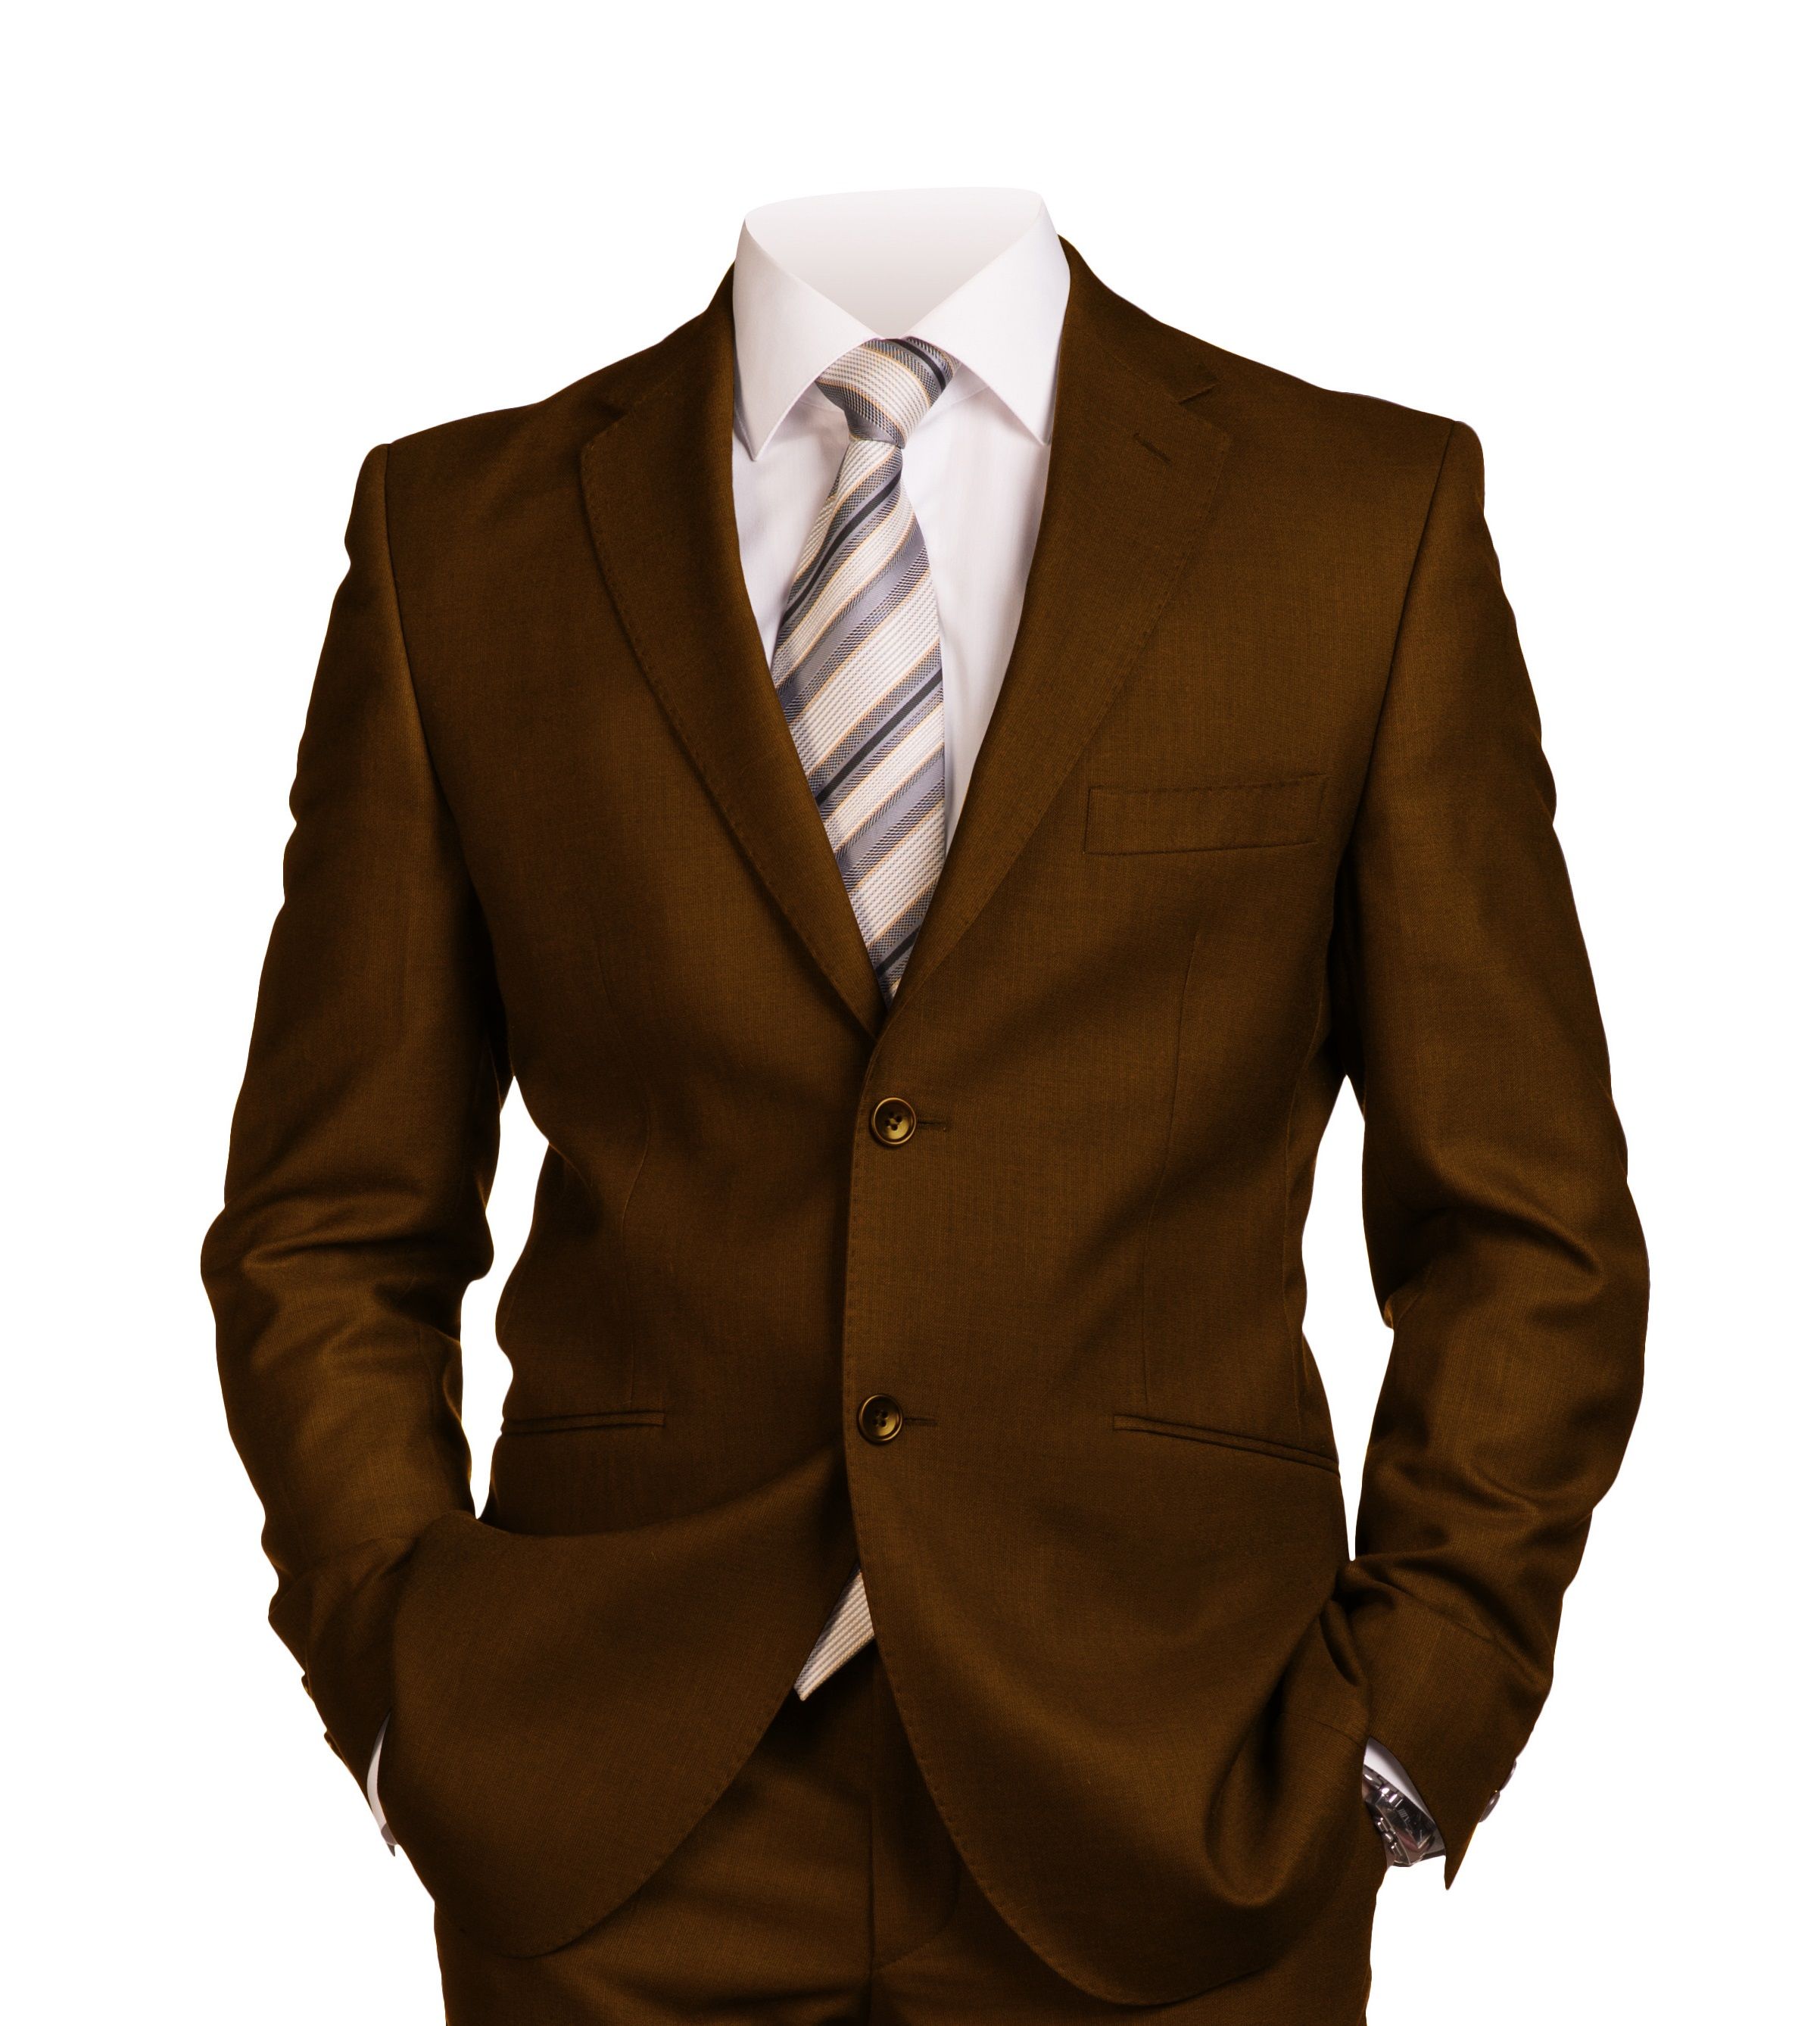 Men's Italian-Style Single-Breasted Suit - Brown *BOGO FREE Sale*